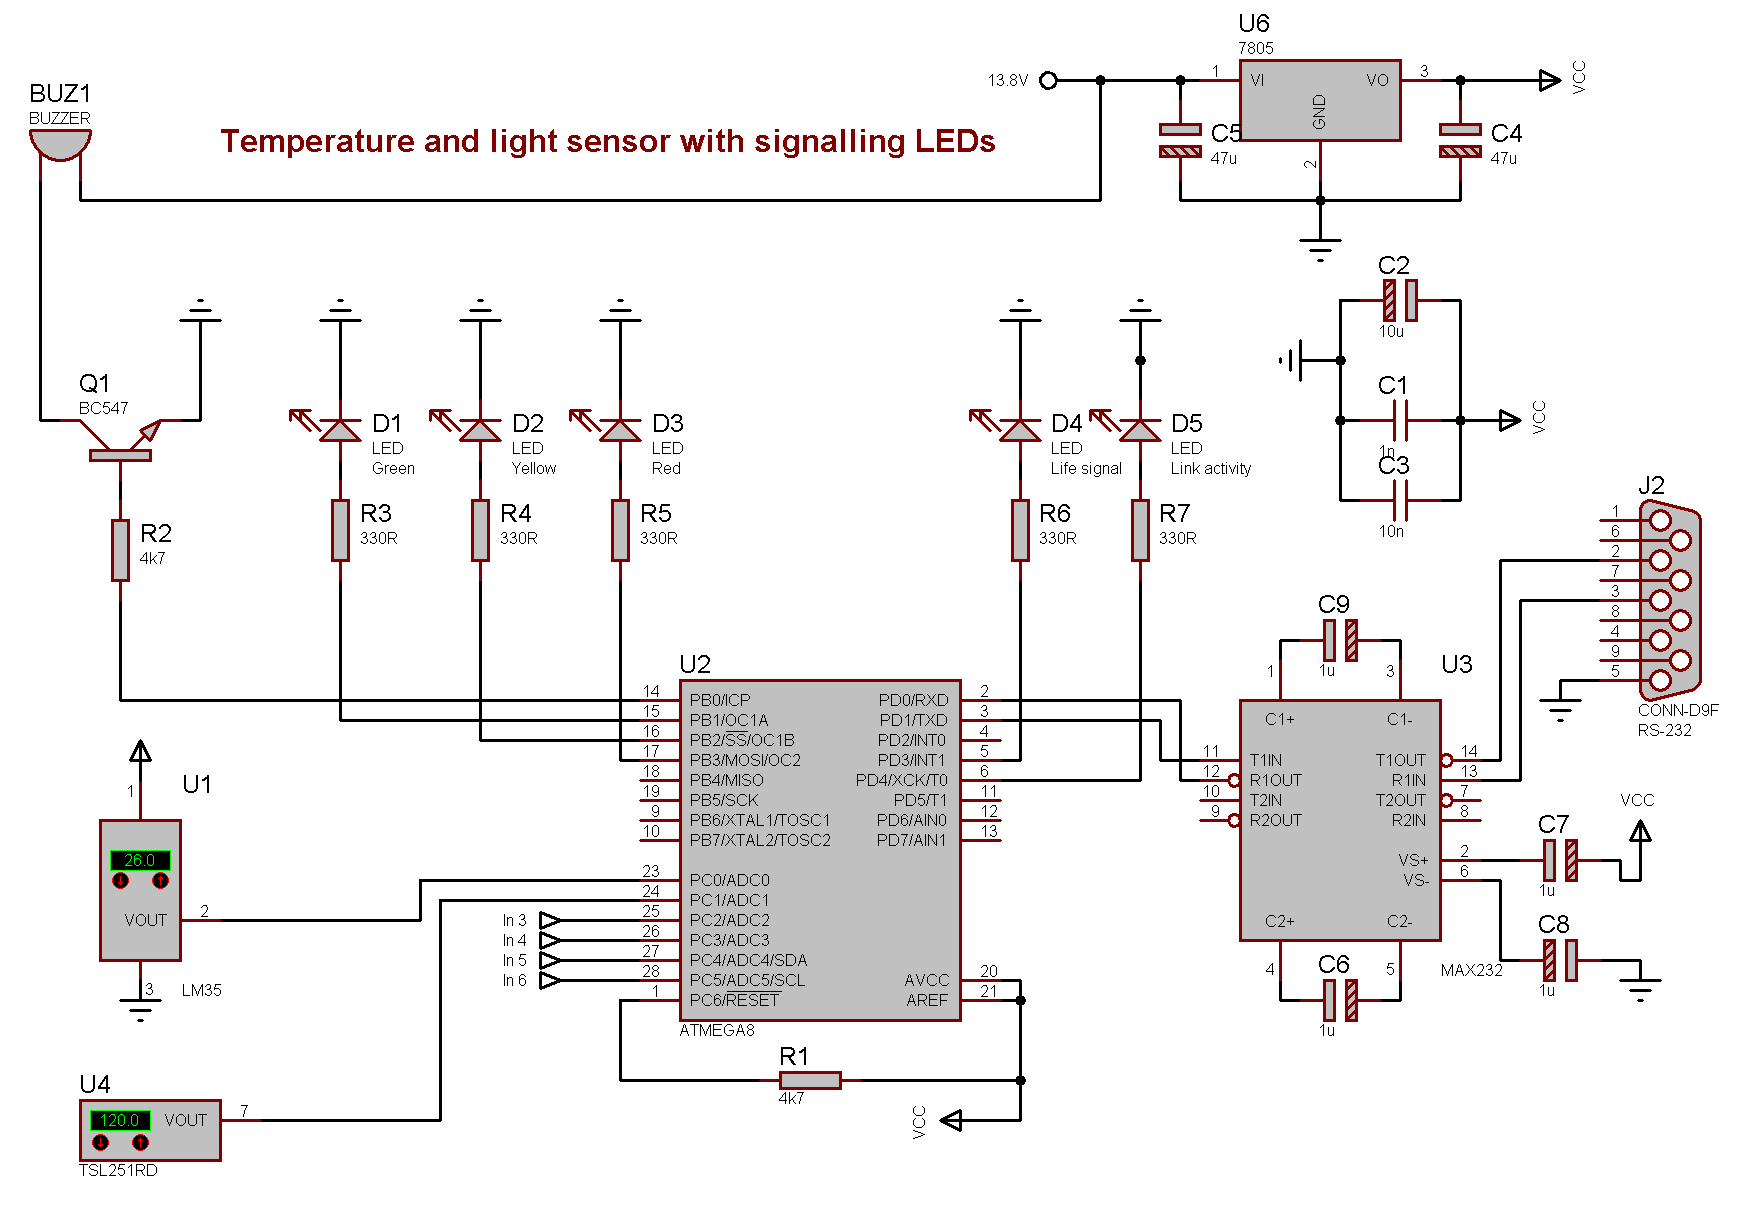 Schematic drawing for temperature and light sensor